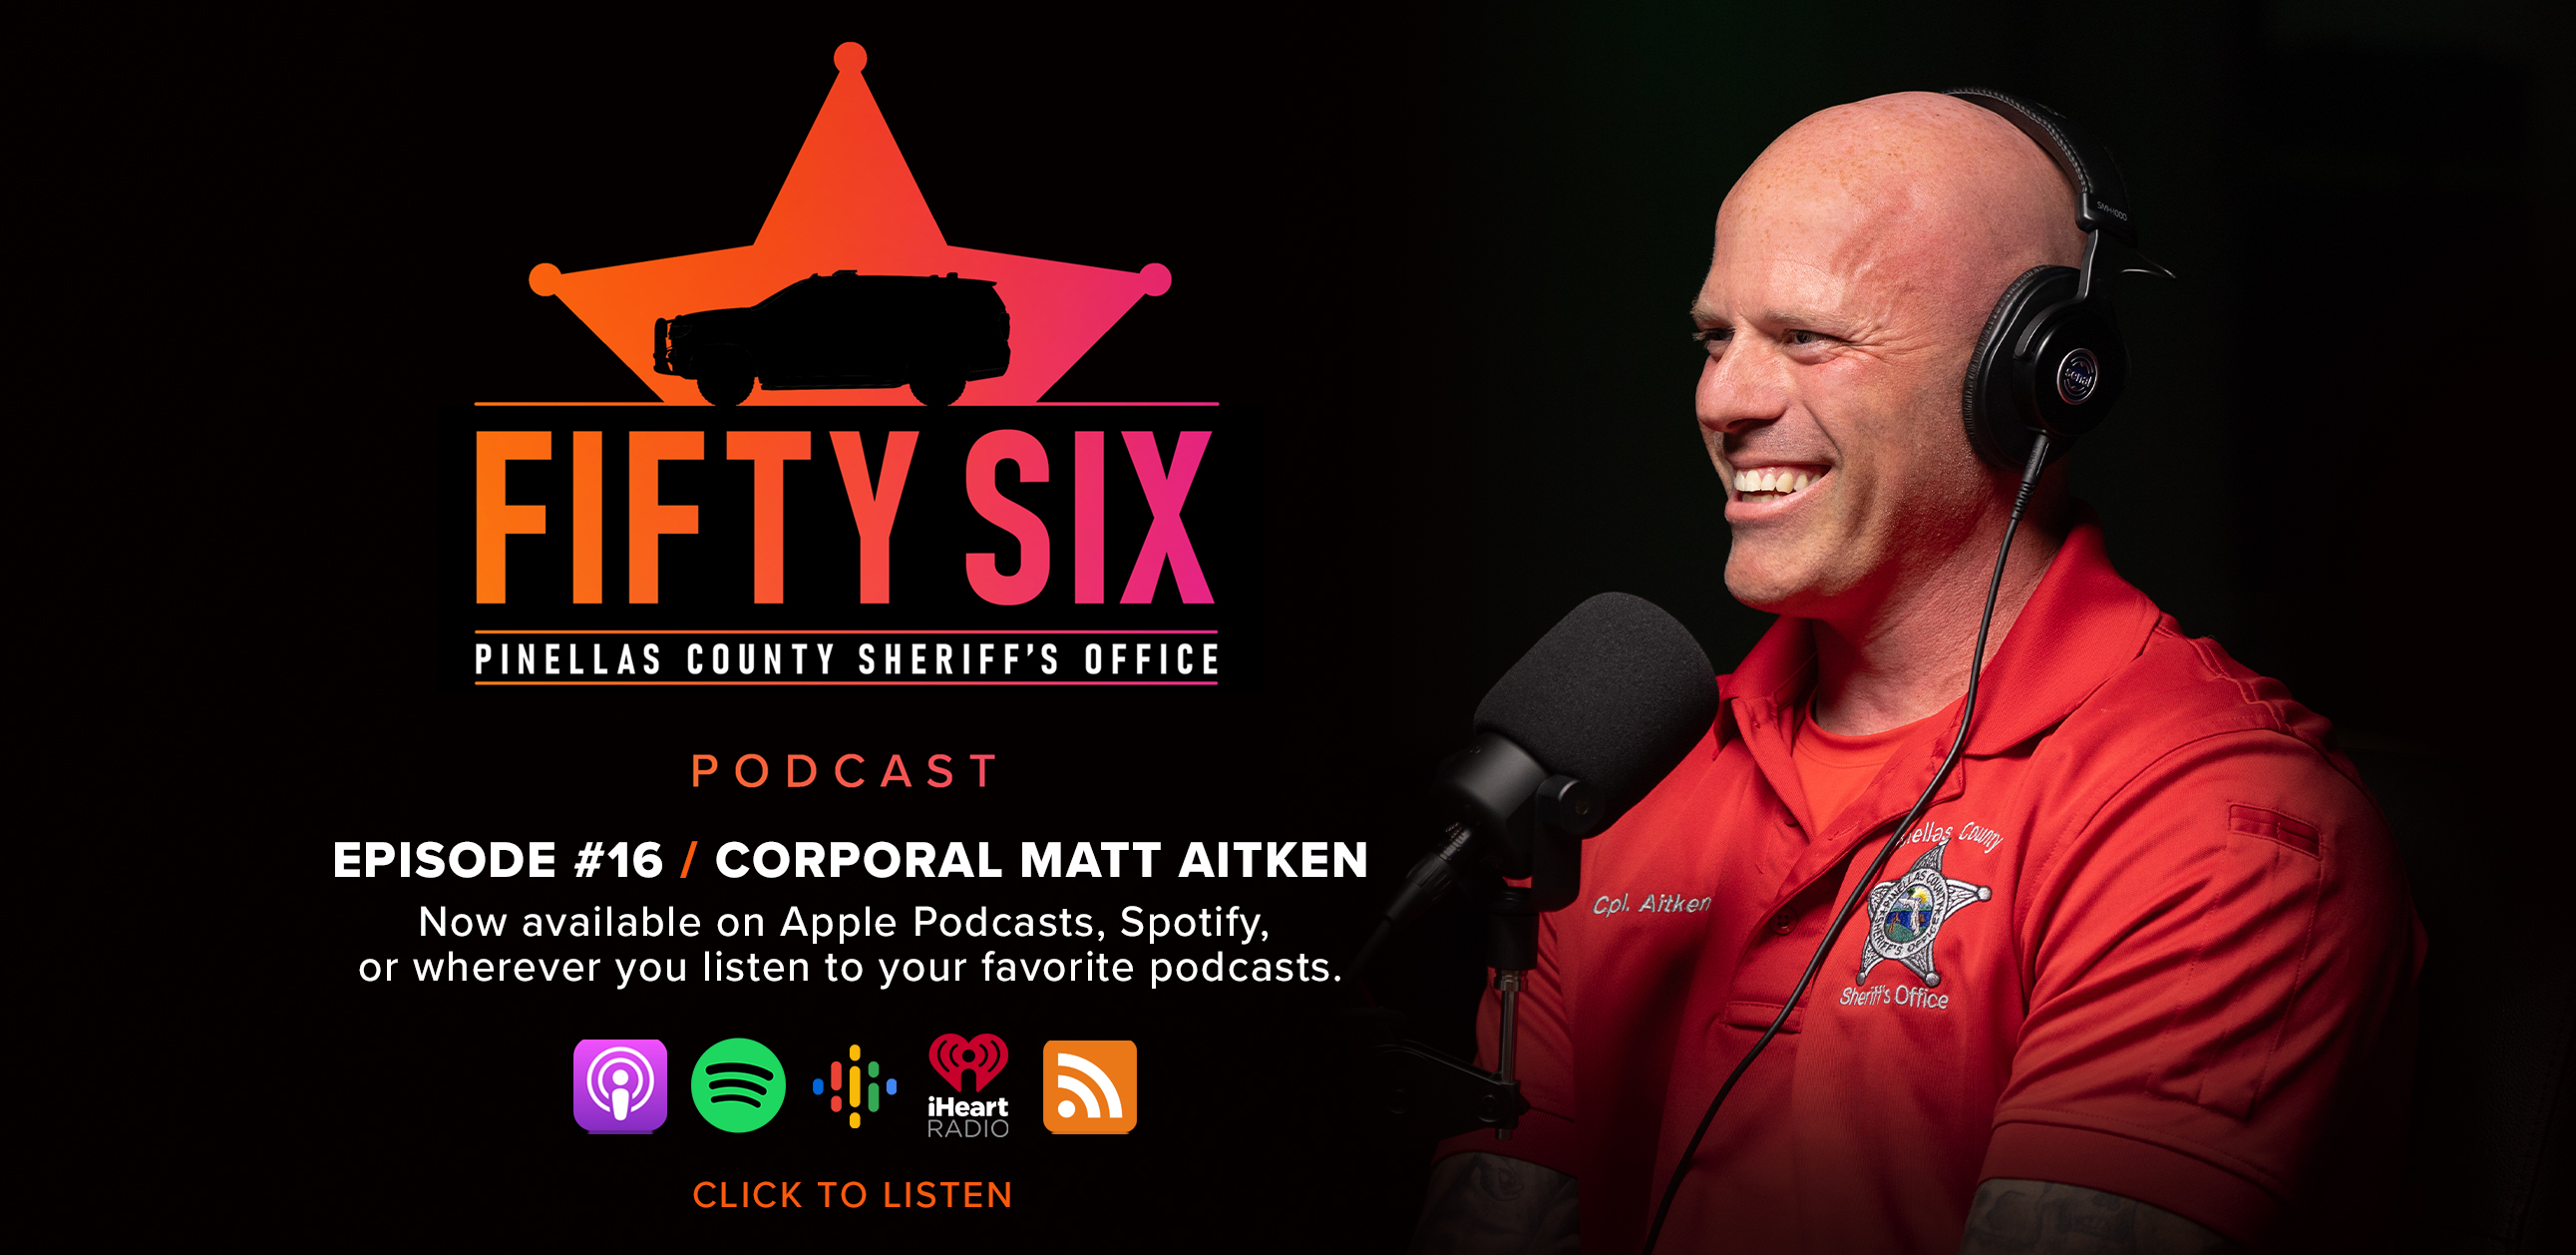 56 Podcast, Episode 16 Corporal Matt Aitken, now available wherever you listen to your favorite podcasts.